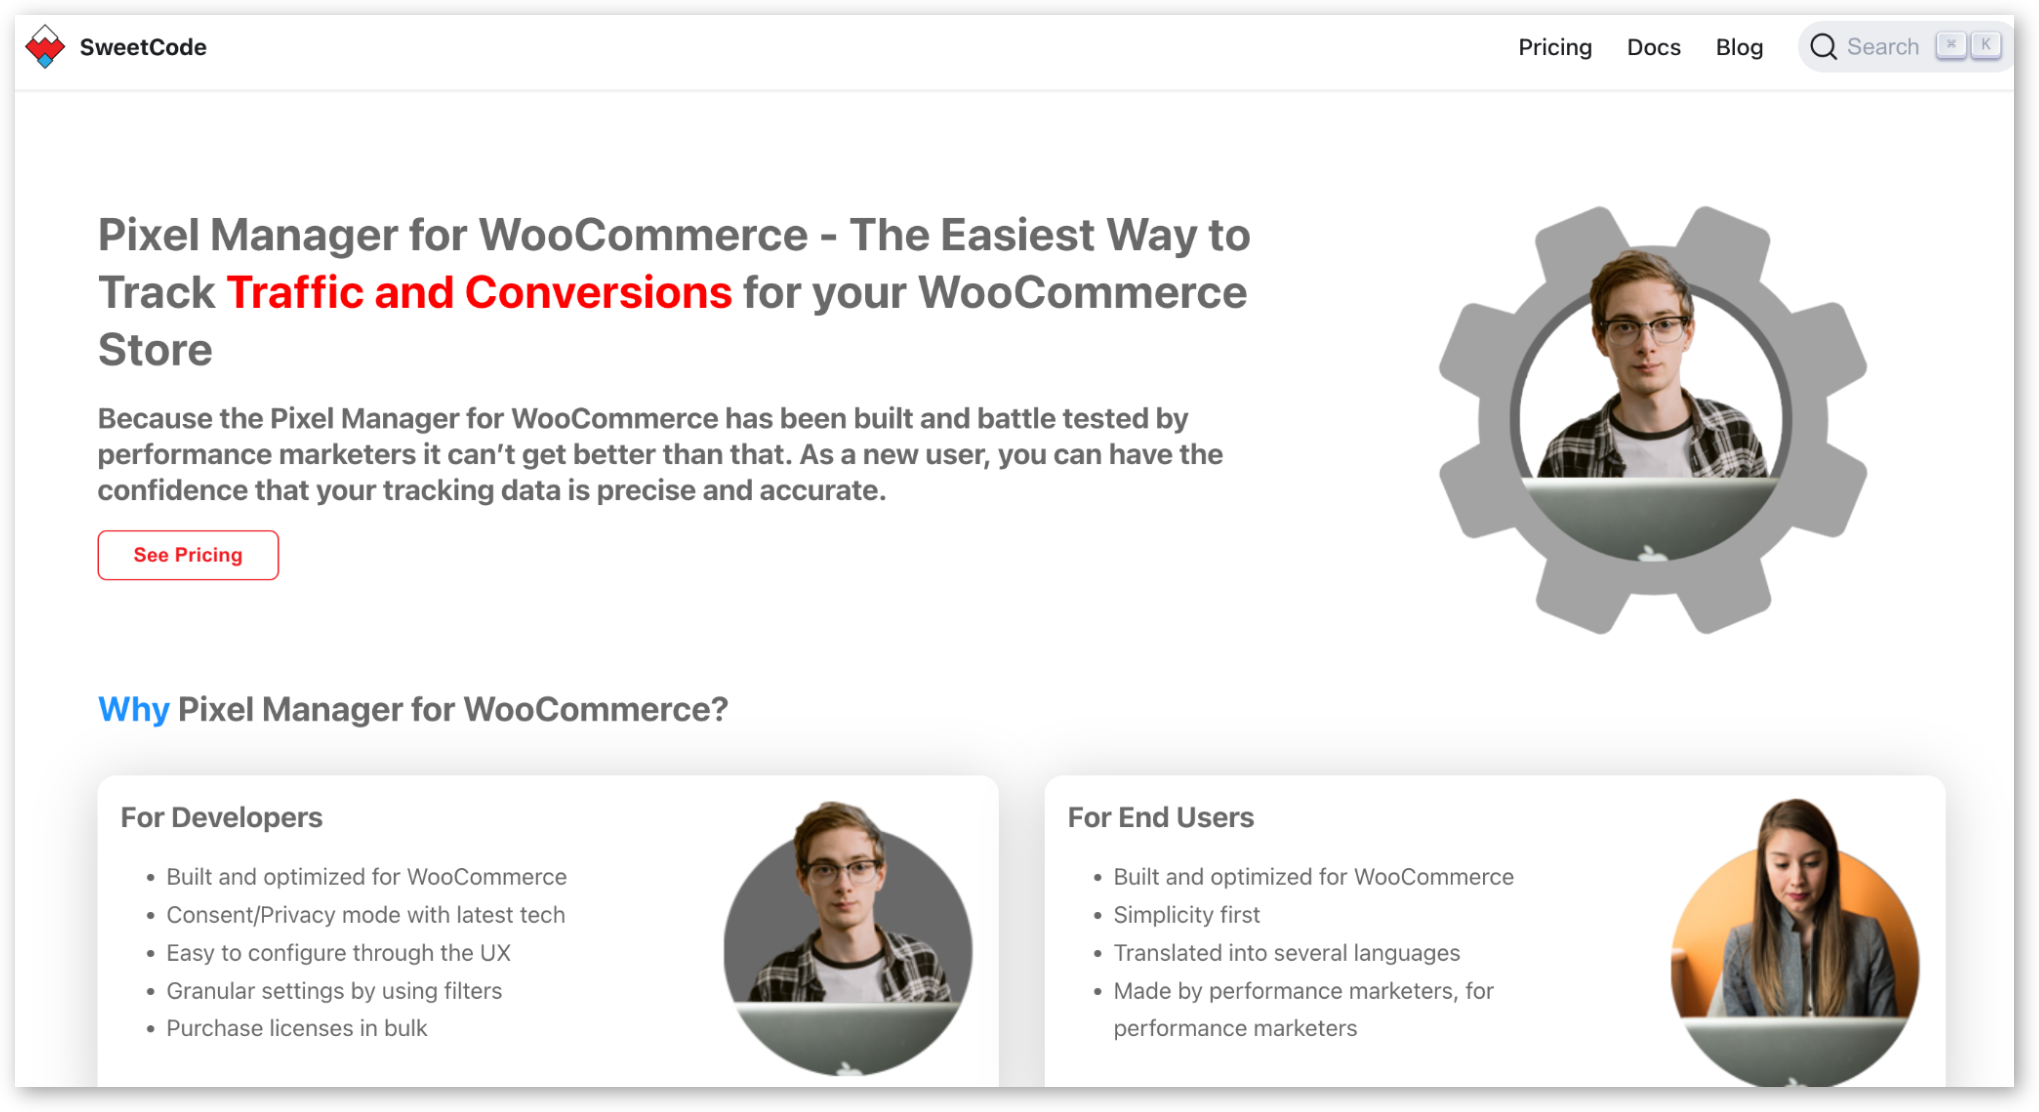 Pixel Manager for WooCommerce